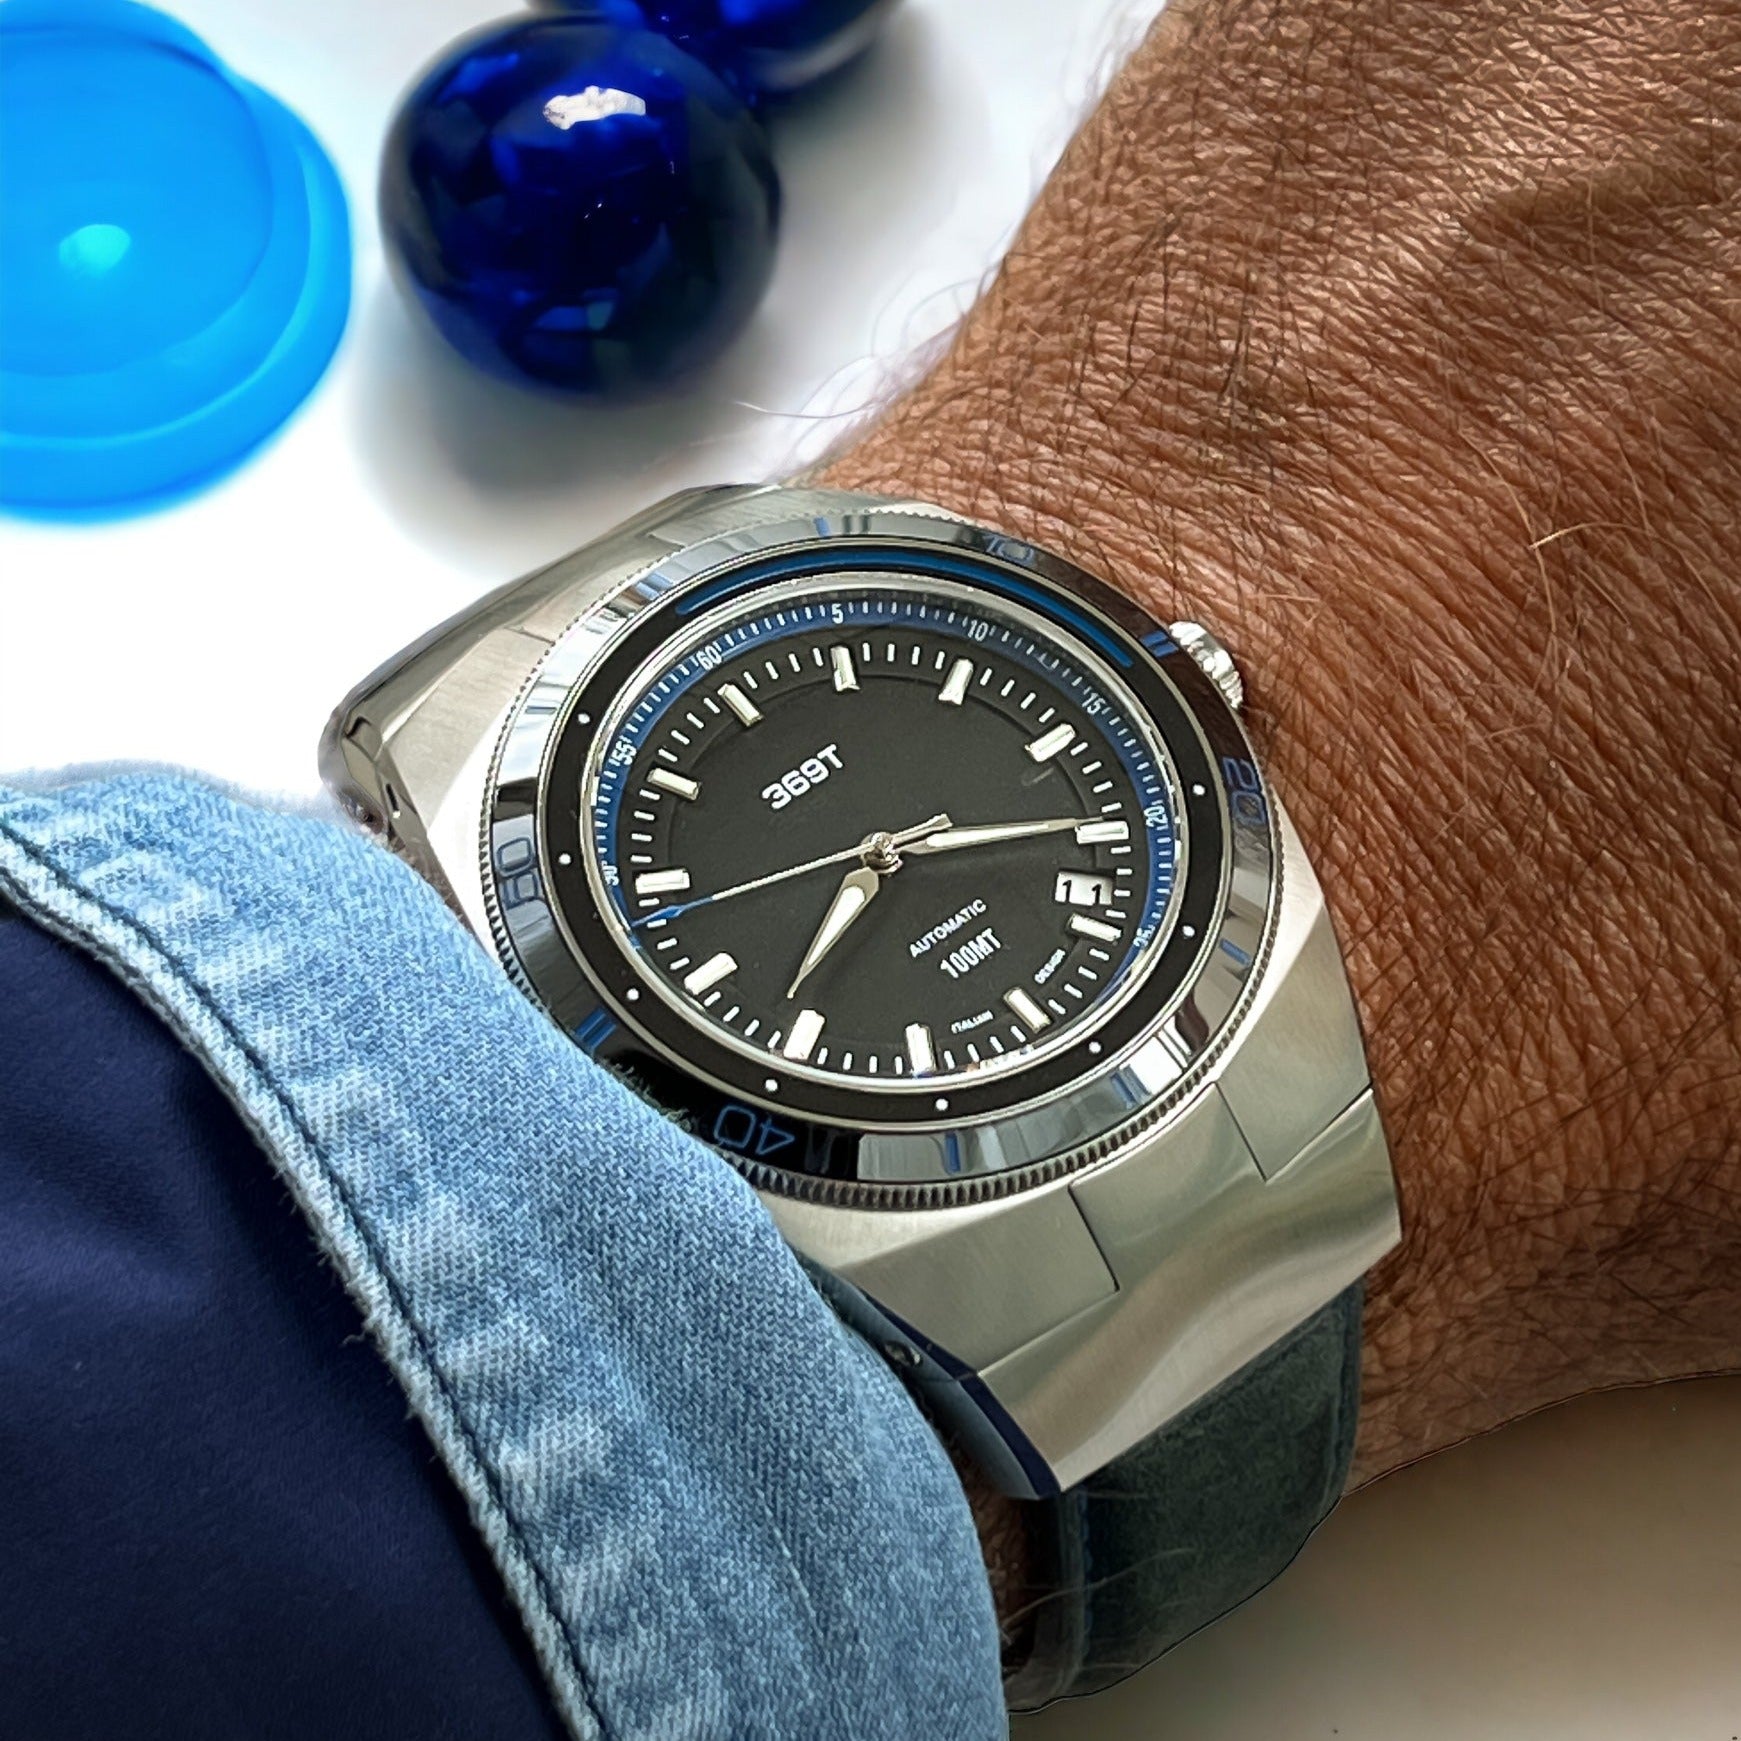 369 T Blue Bezel with the colosseum dial in evidence